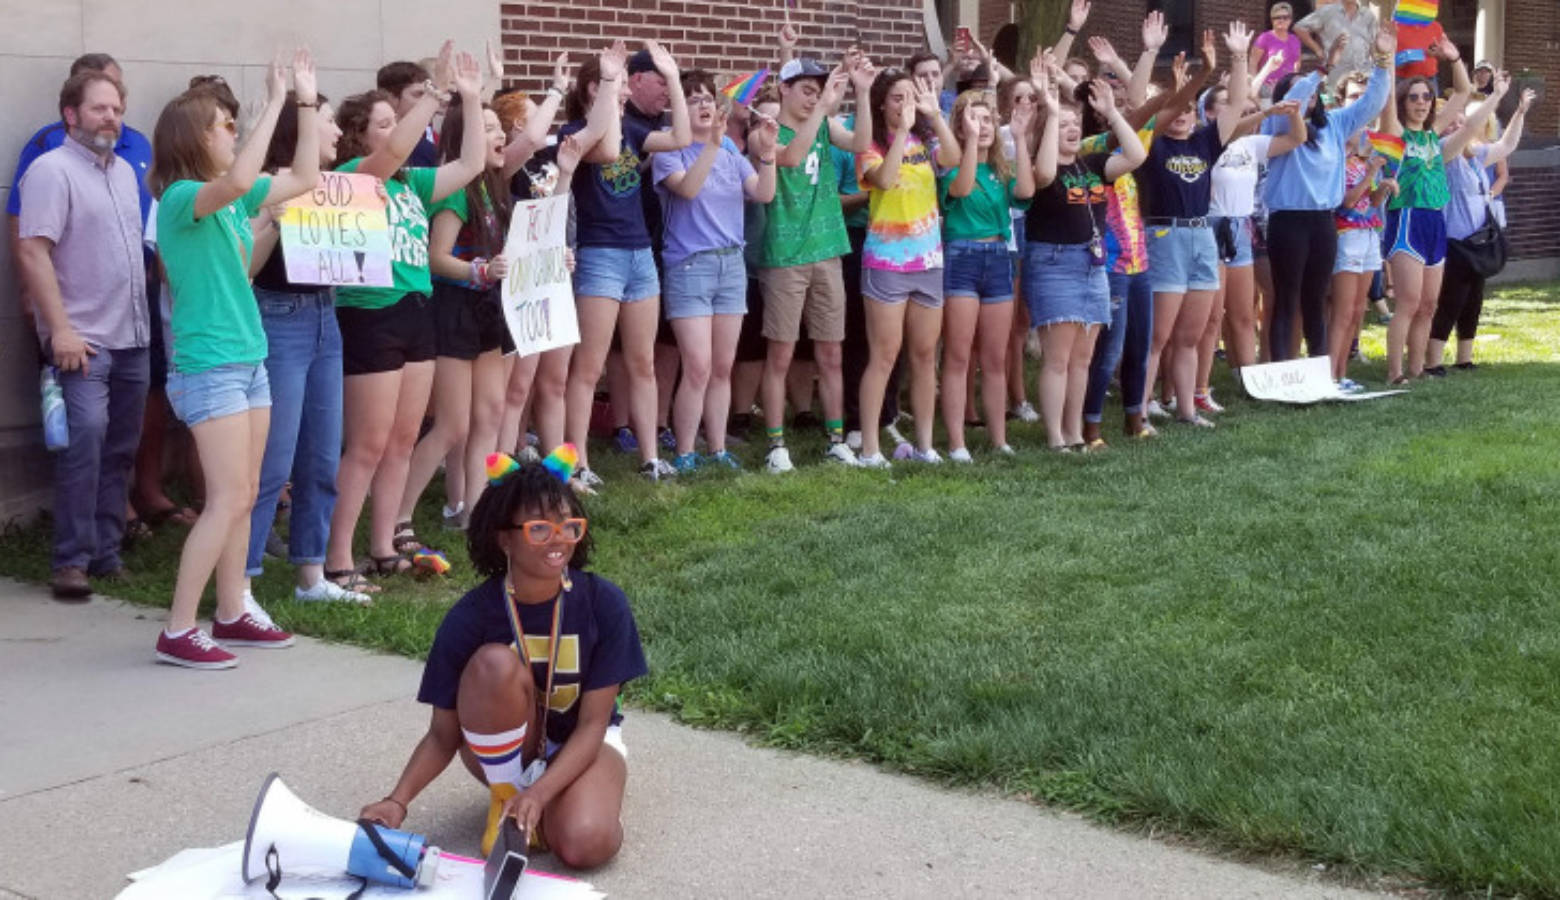 Student organizer Brooklynn Thorpe uses a megaphone to amplify music as fellow students lead school chants and cheers outside of the Archdiocese of Indianapolis during a protest Thursday, June 27, 2019.